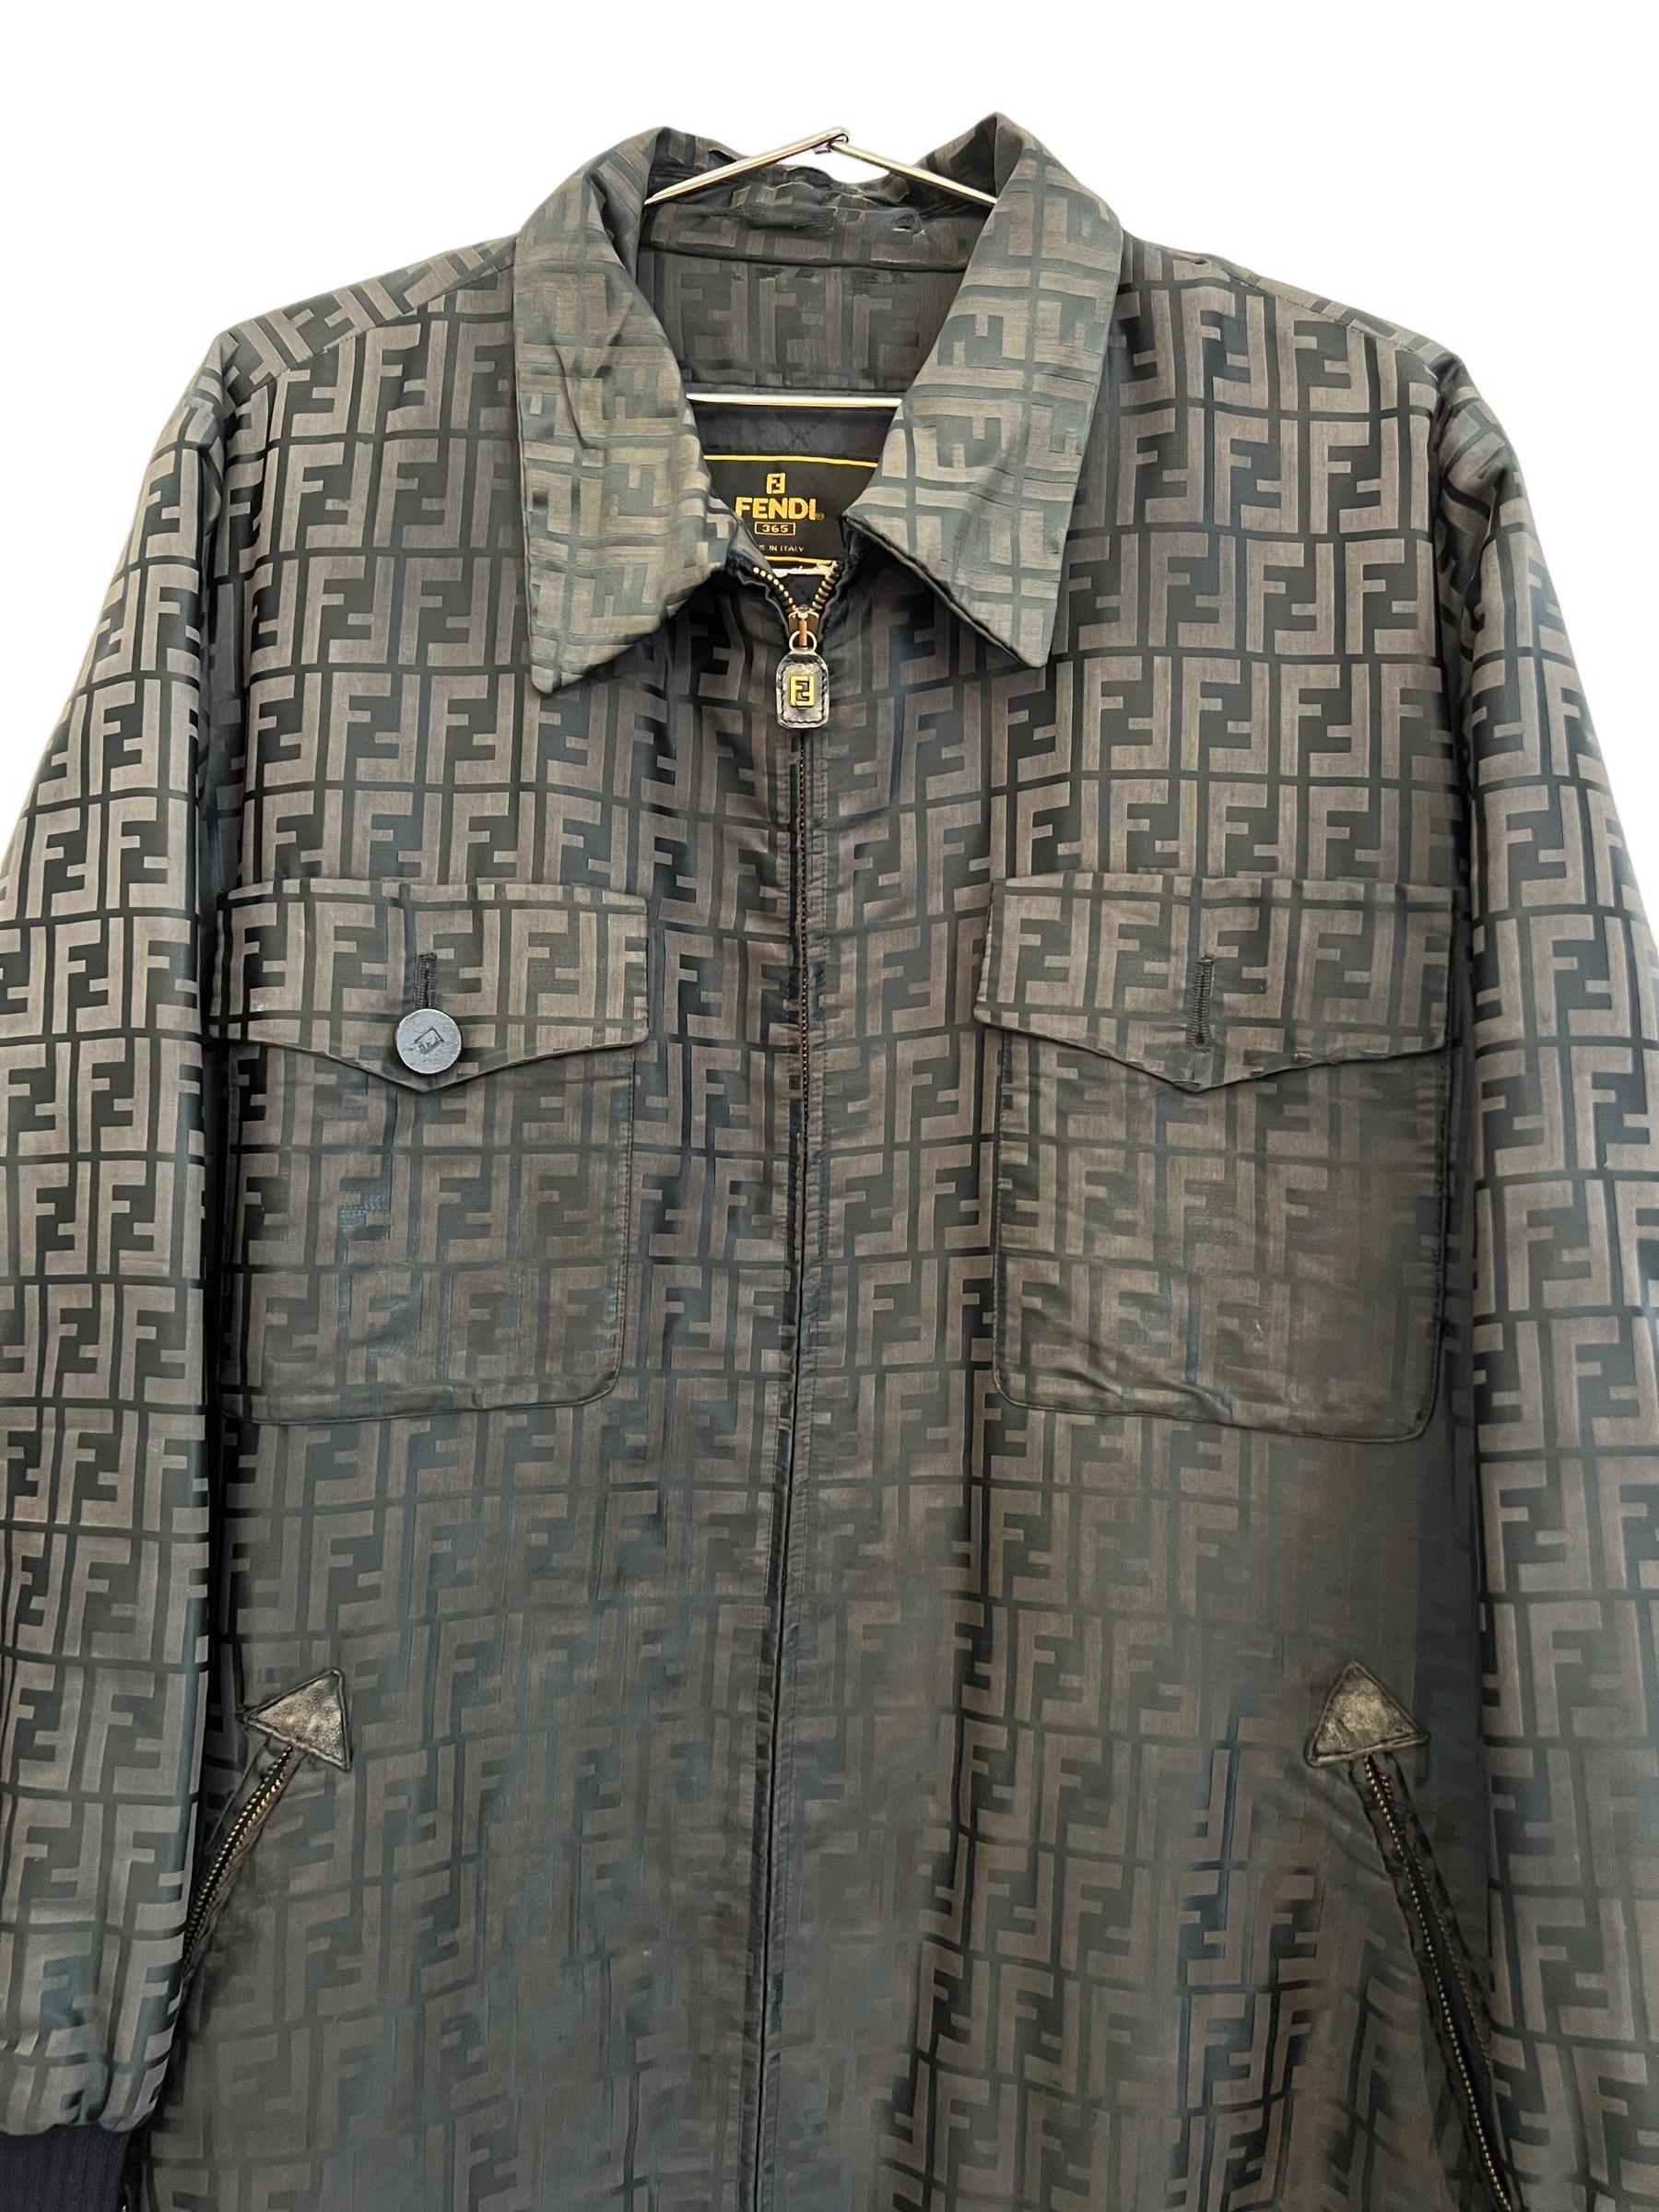 Vintage FENDI Jacquard FF Jacquard Zucca Jacket Coat In Fair Condition For Sale In Sheffield, GB